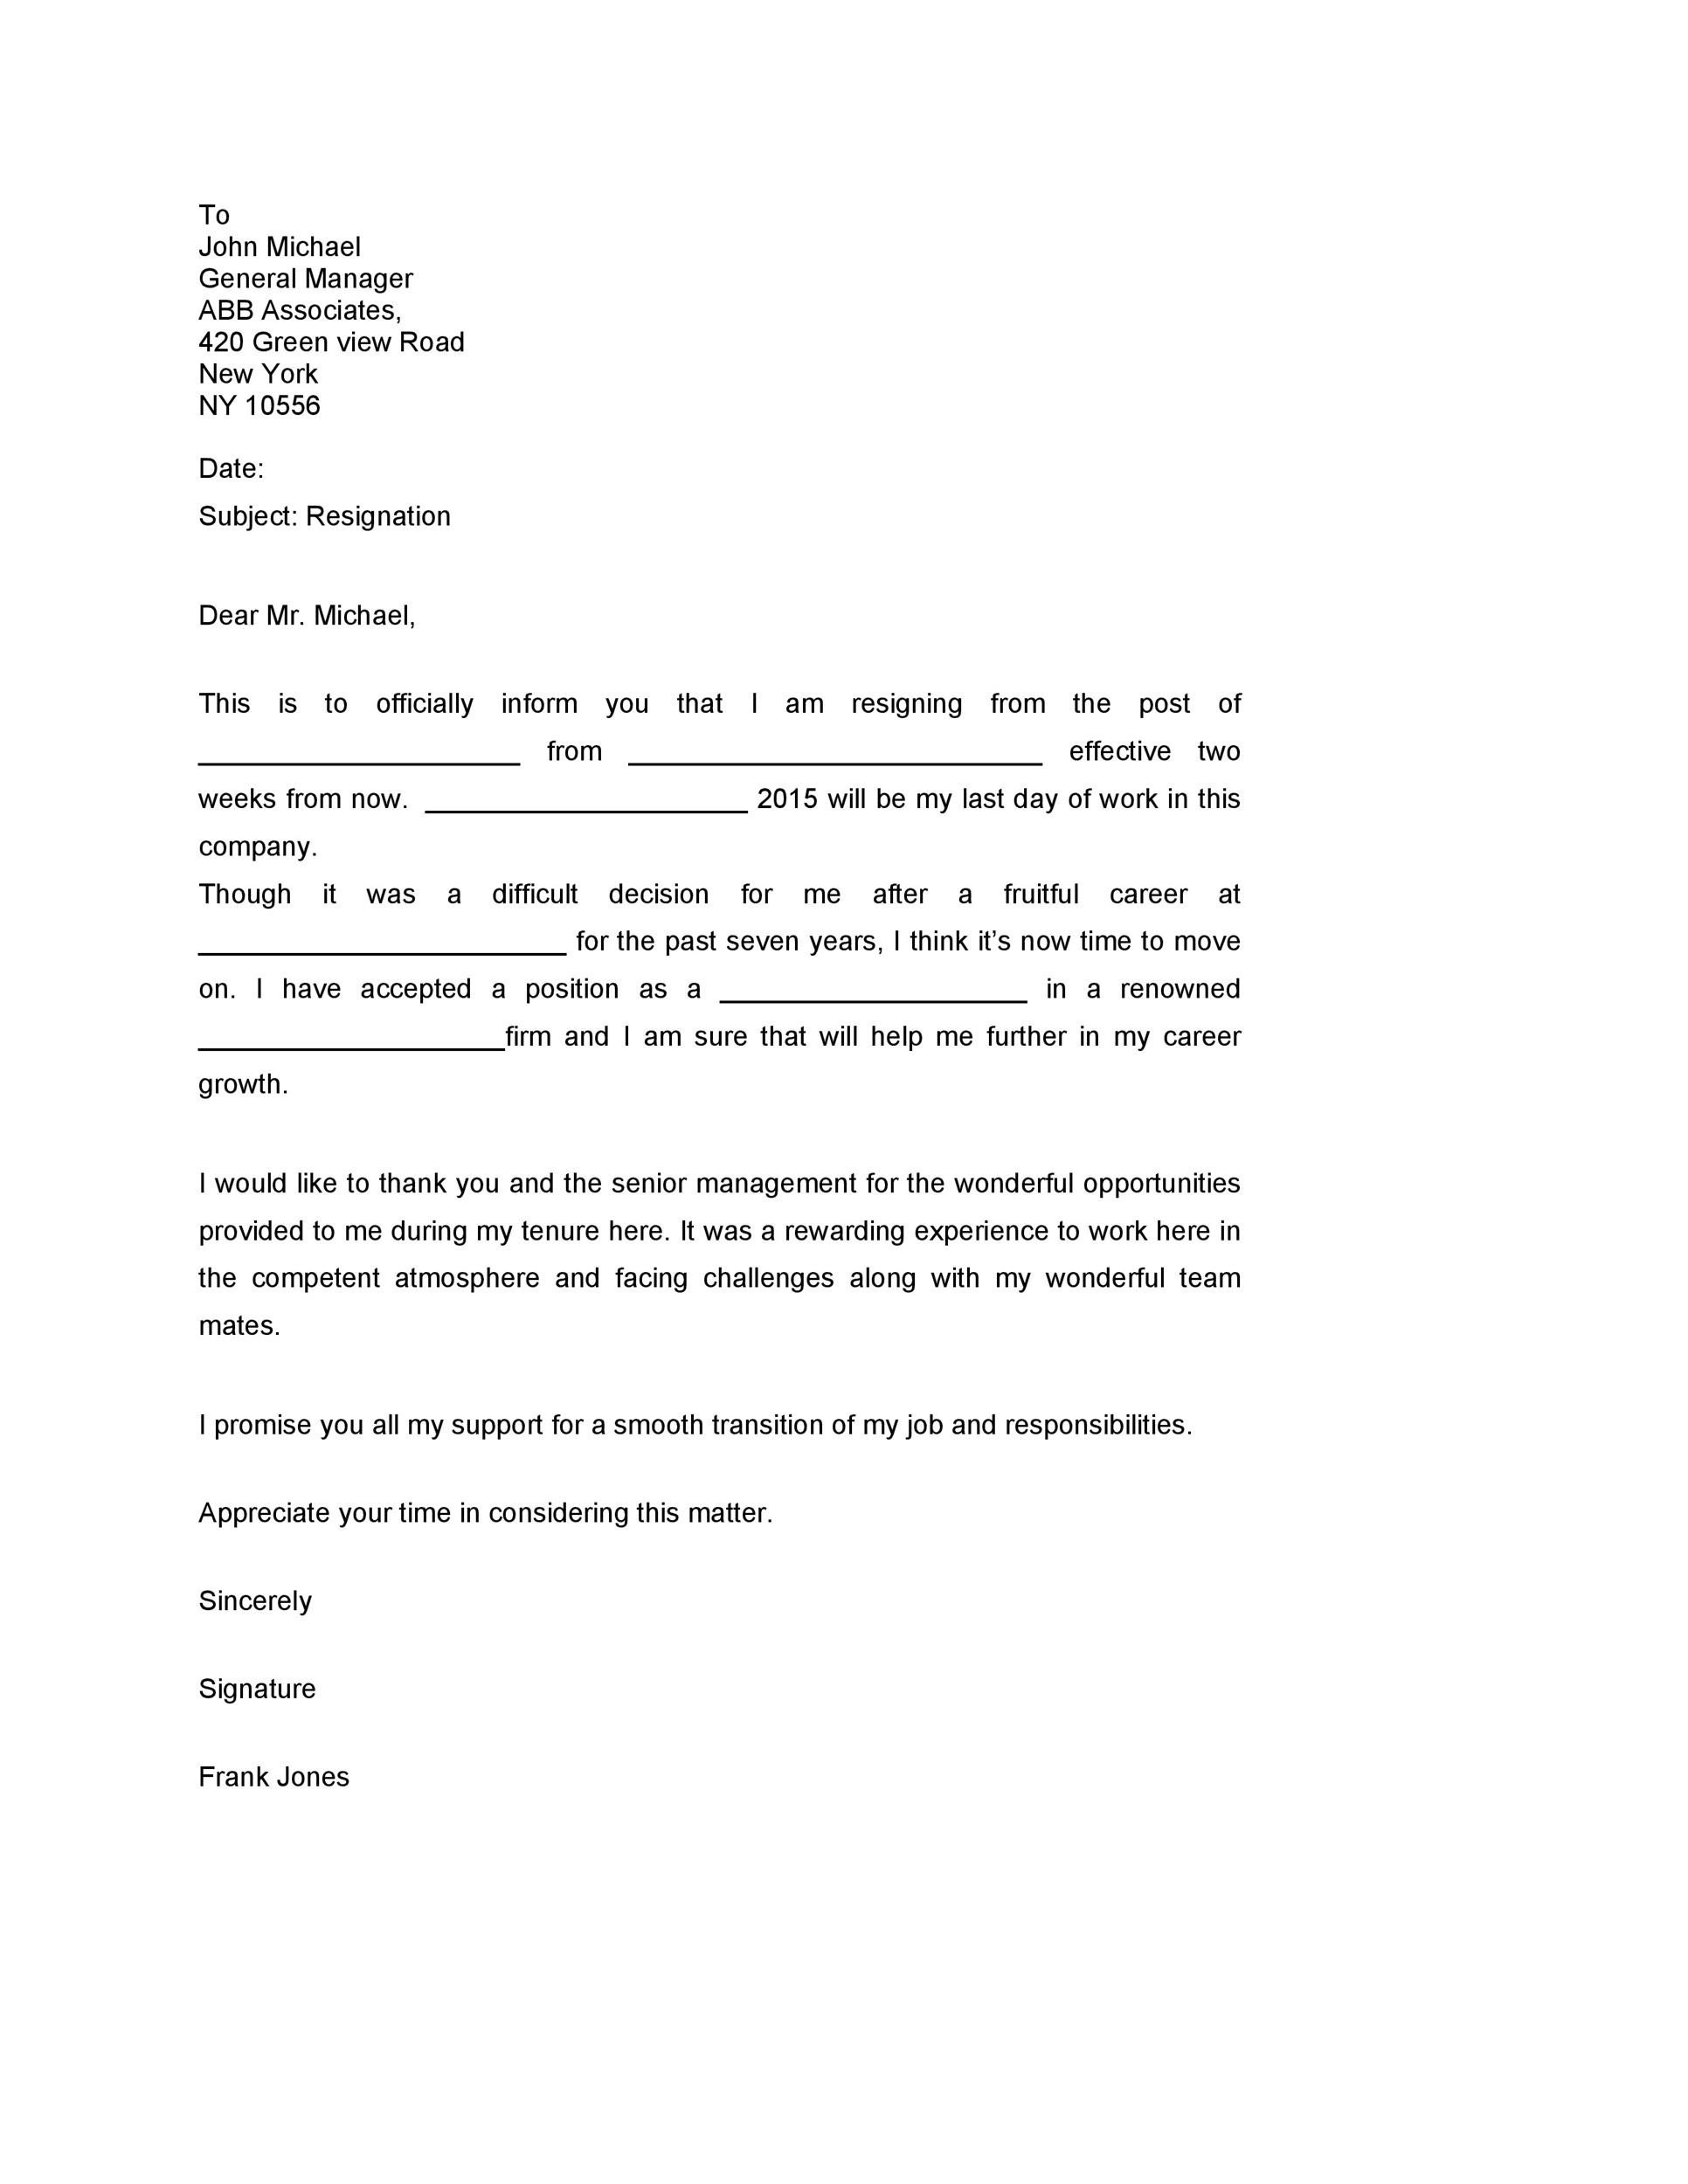 Resignation Letter Template Two Weeks Notice from templatelab.com